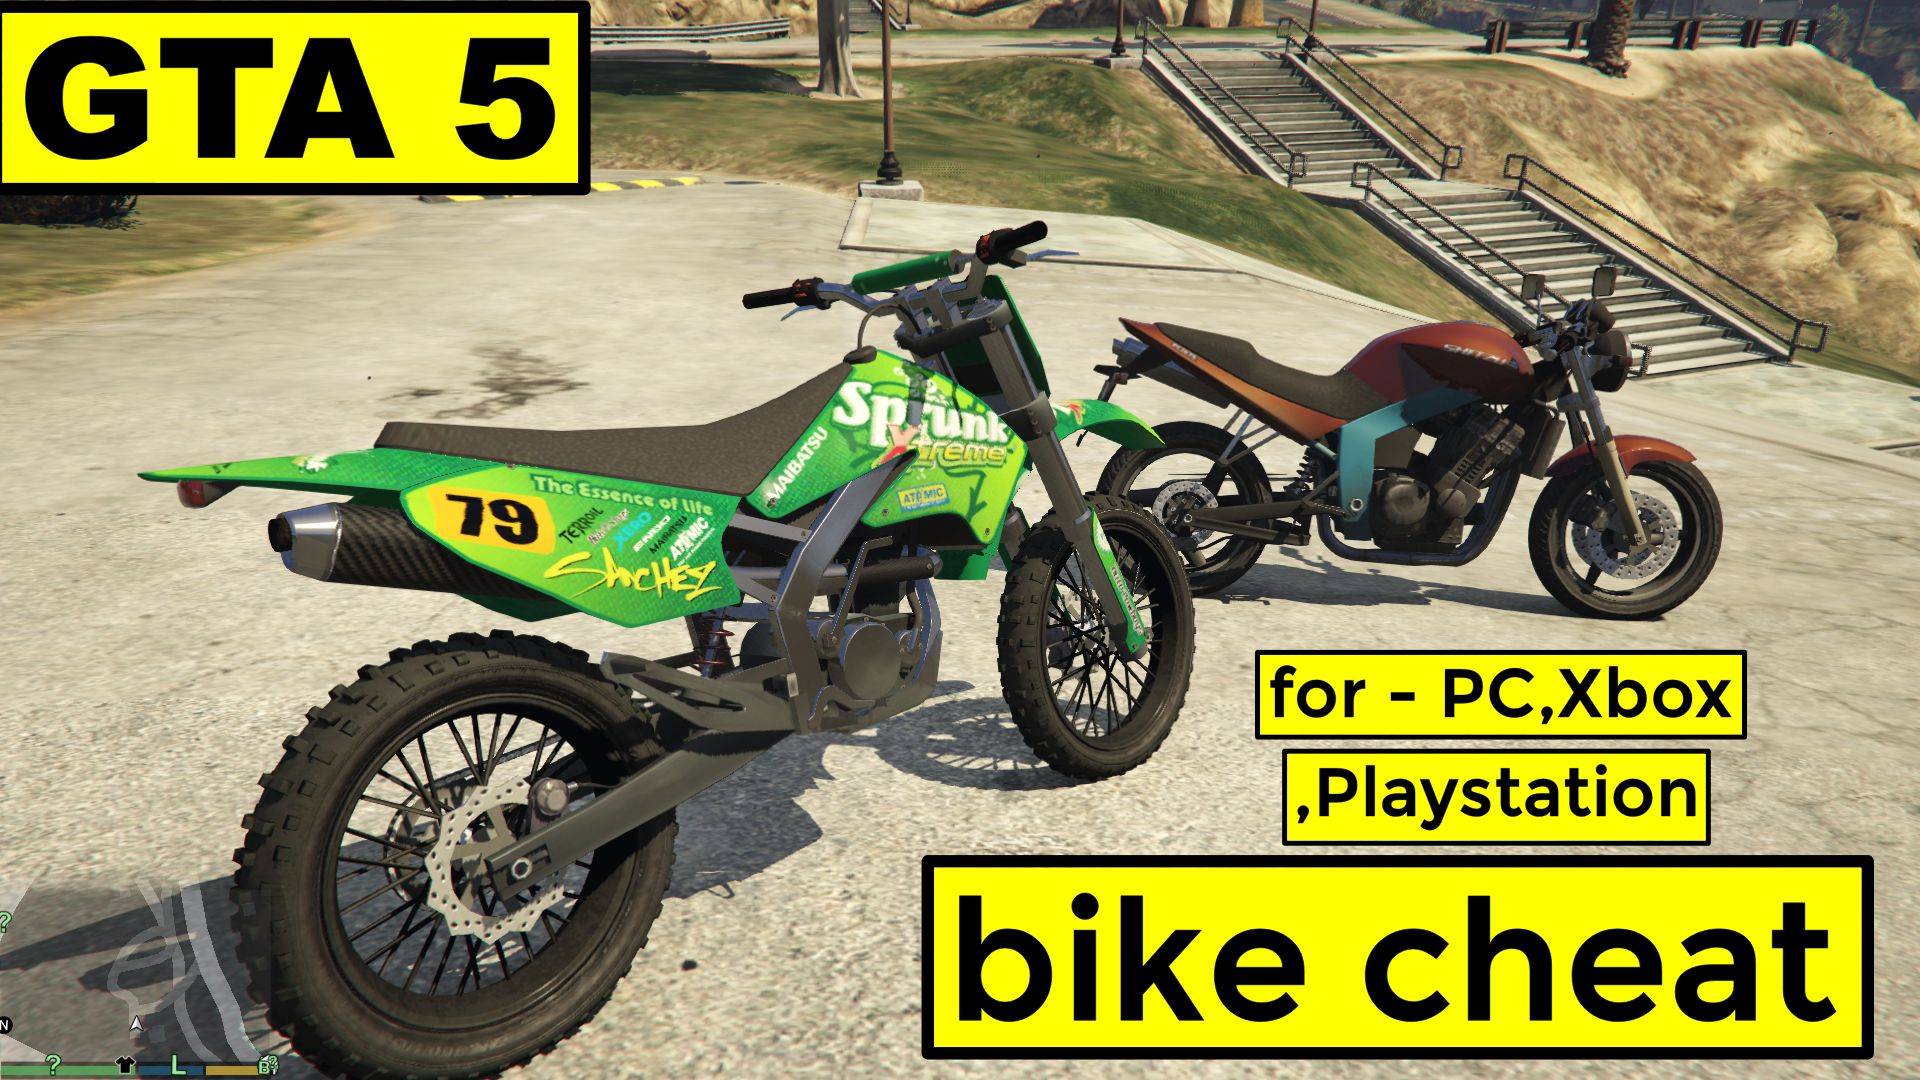 GTA 5 bike cheats for – for PC, Xbox, Playstation